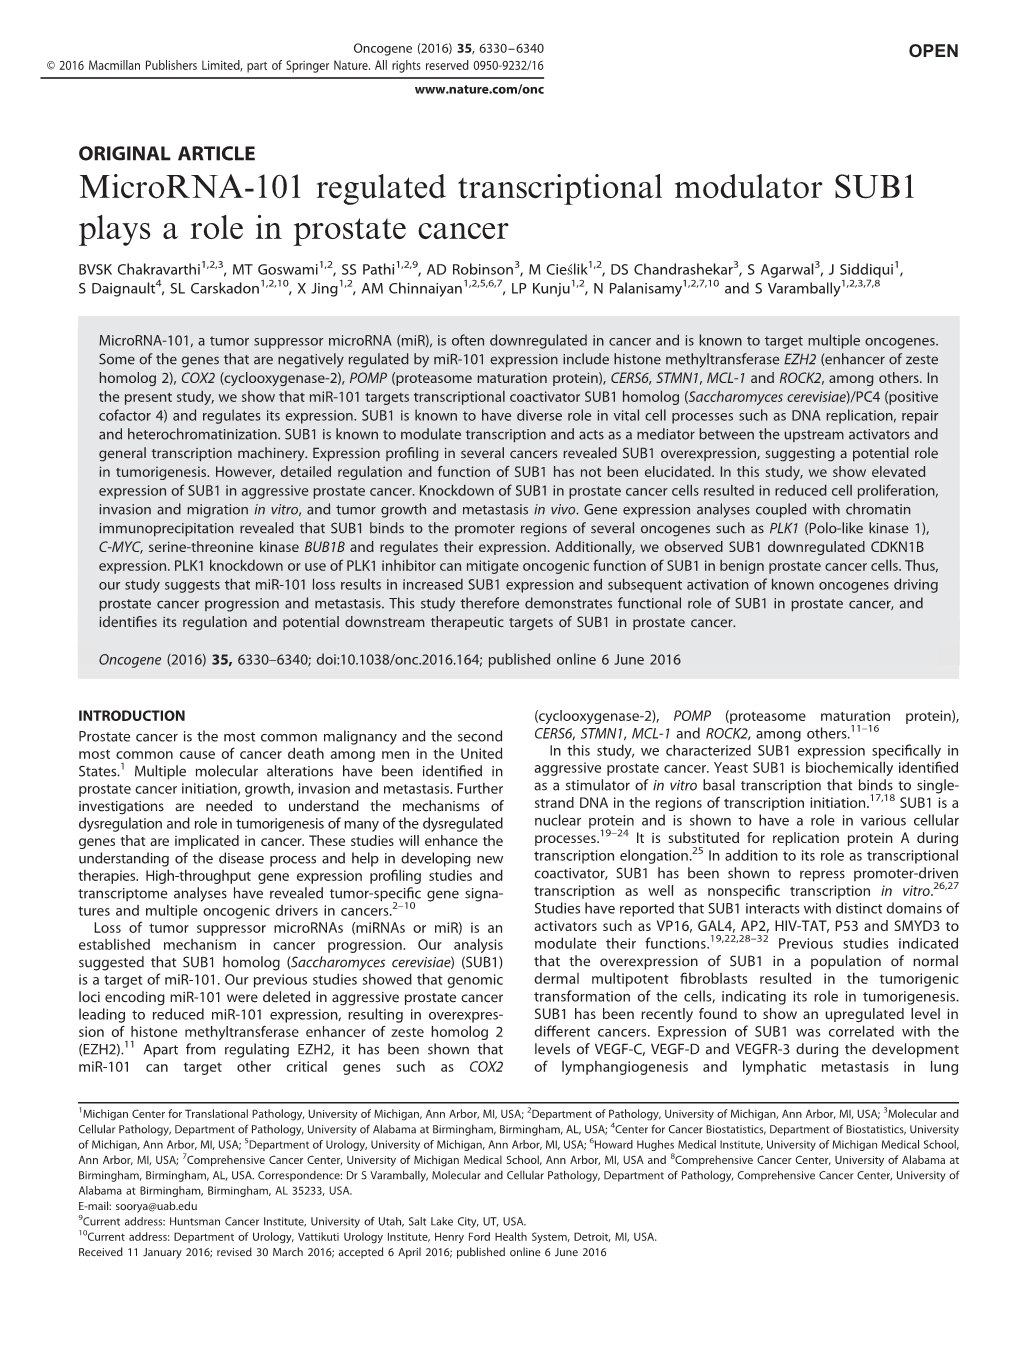 Microrna-101 Regulated Transcriptional Modulator SUB1 Plays a Role in Prostate Cancer